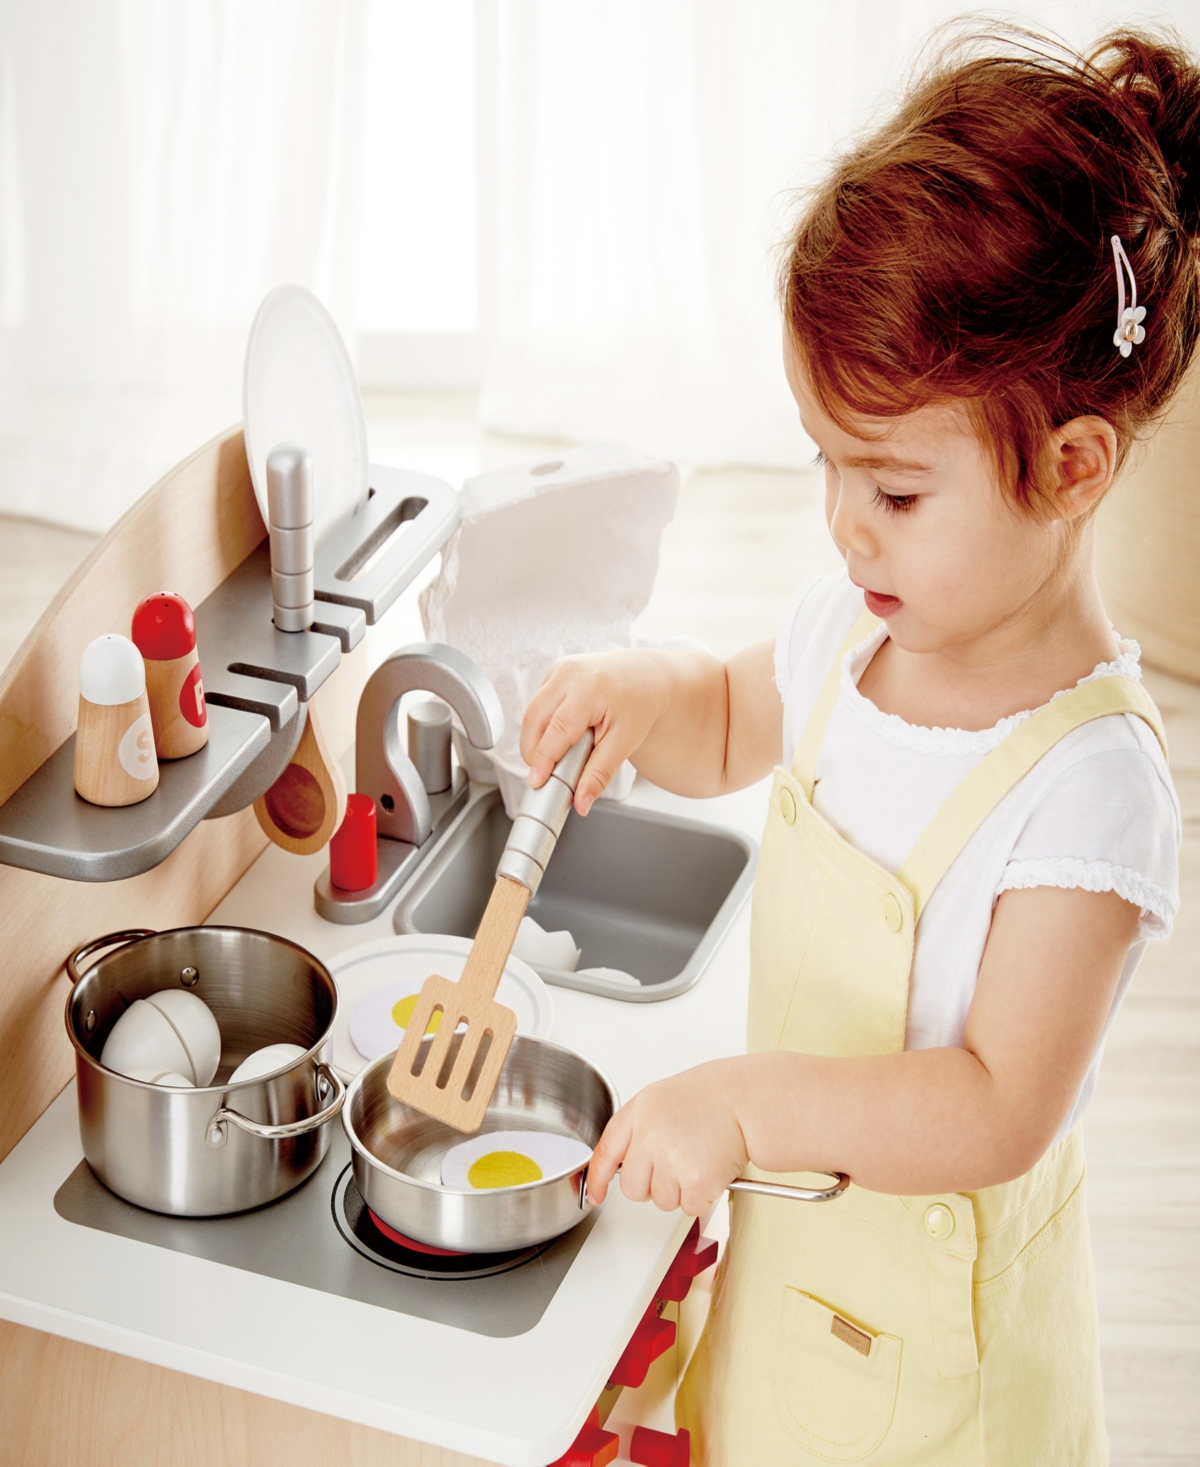 Shop Hape Fully Equipped White Gourmet Kitchen In Multi